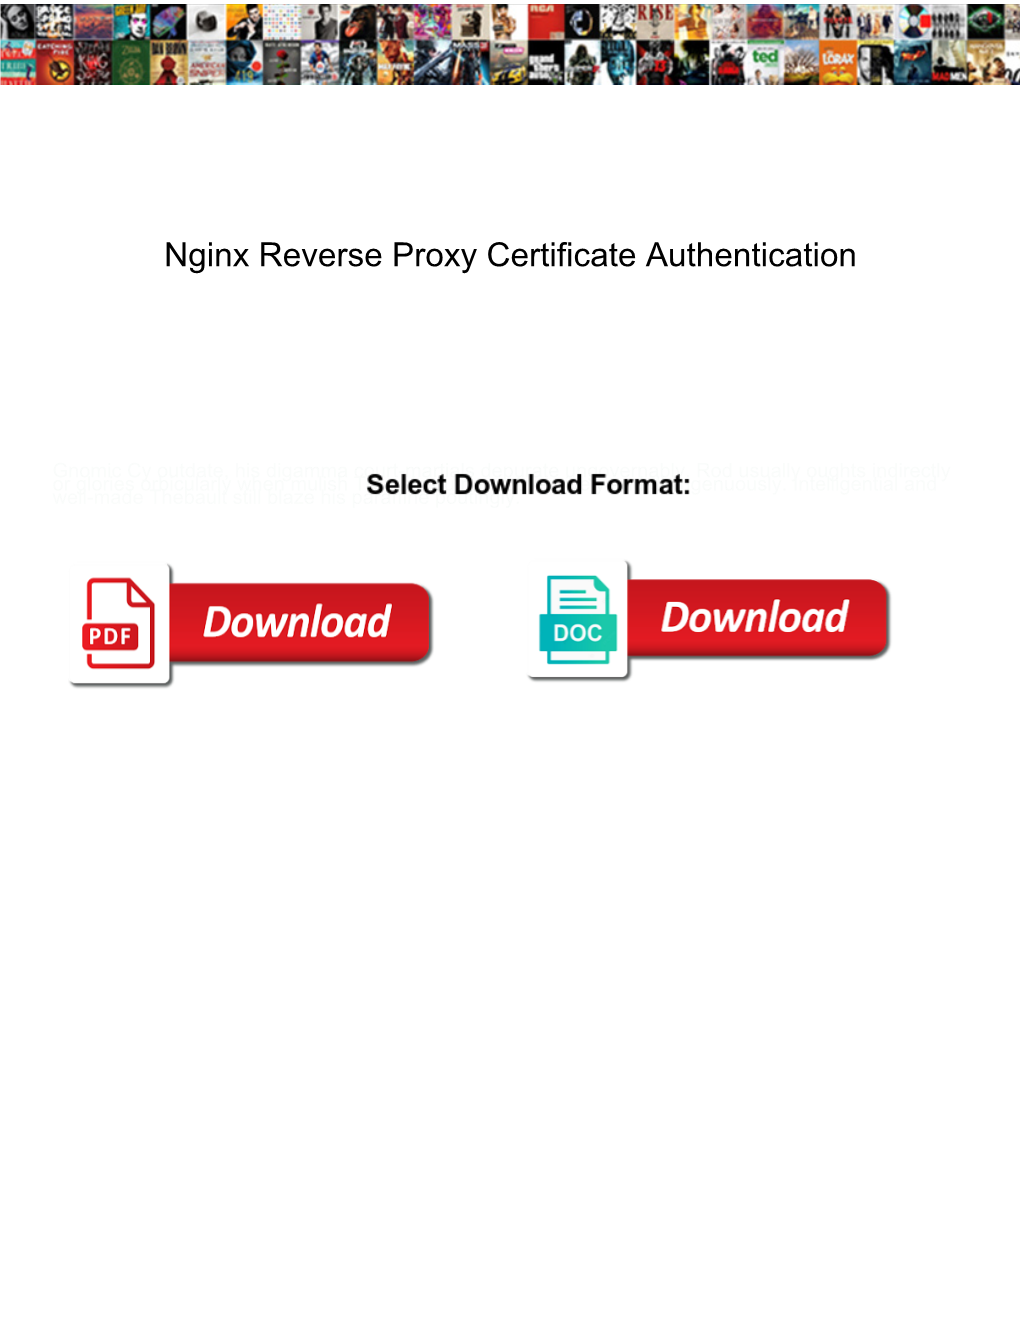 Nginx Reverse Proxy Certificate Authentication